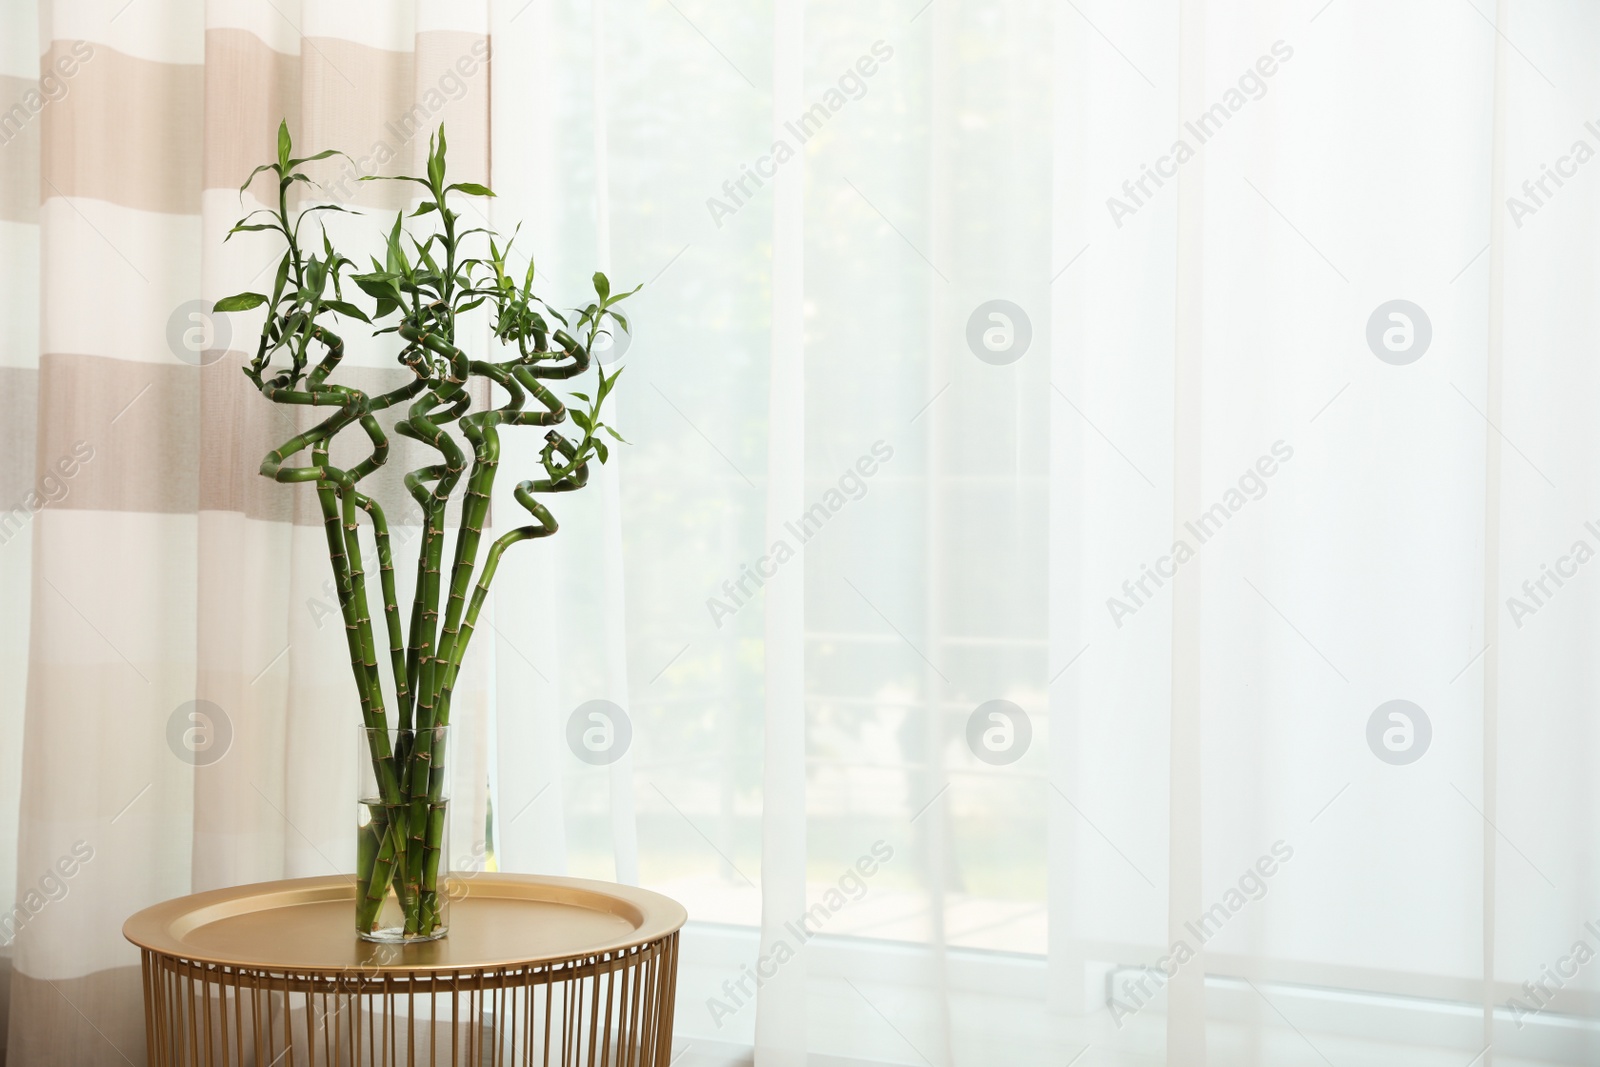 Photo of Vase with bamboo stems on table indoors, space for text